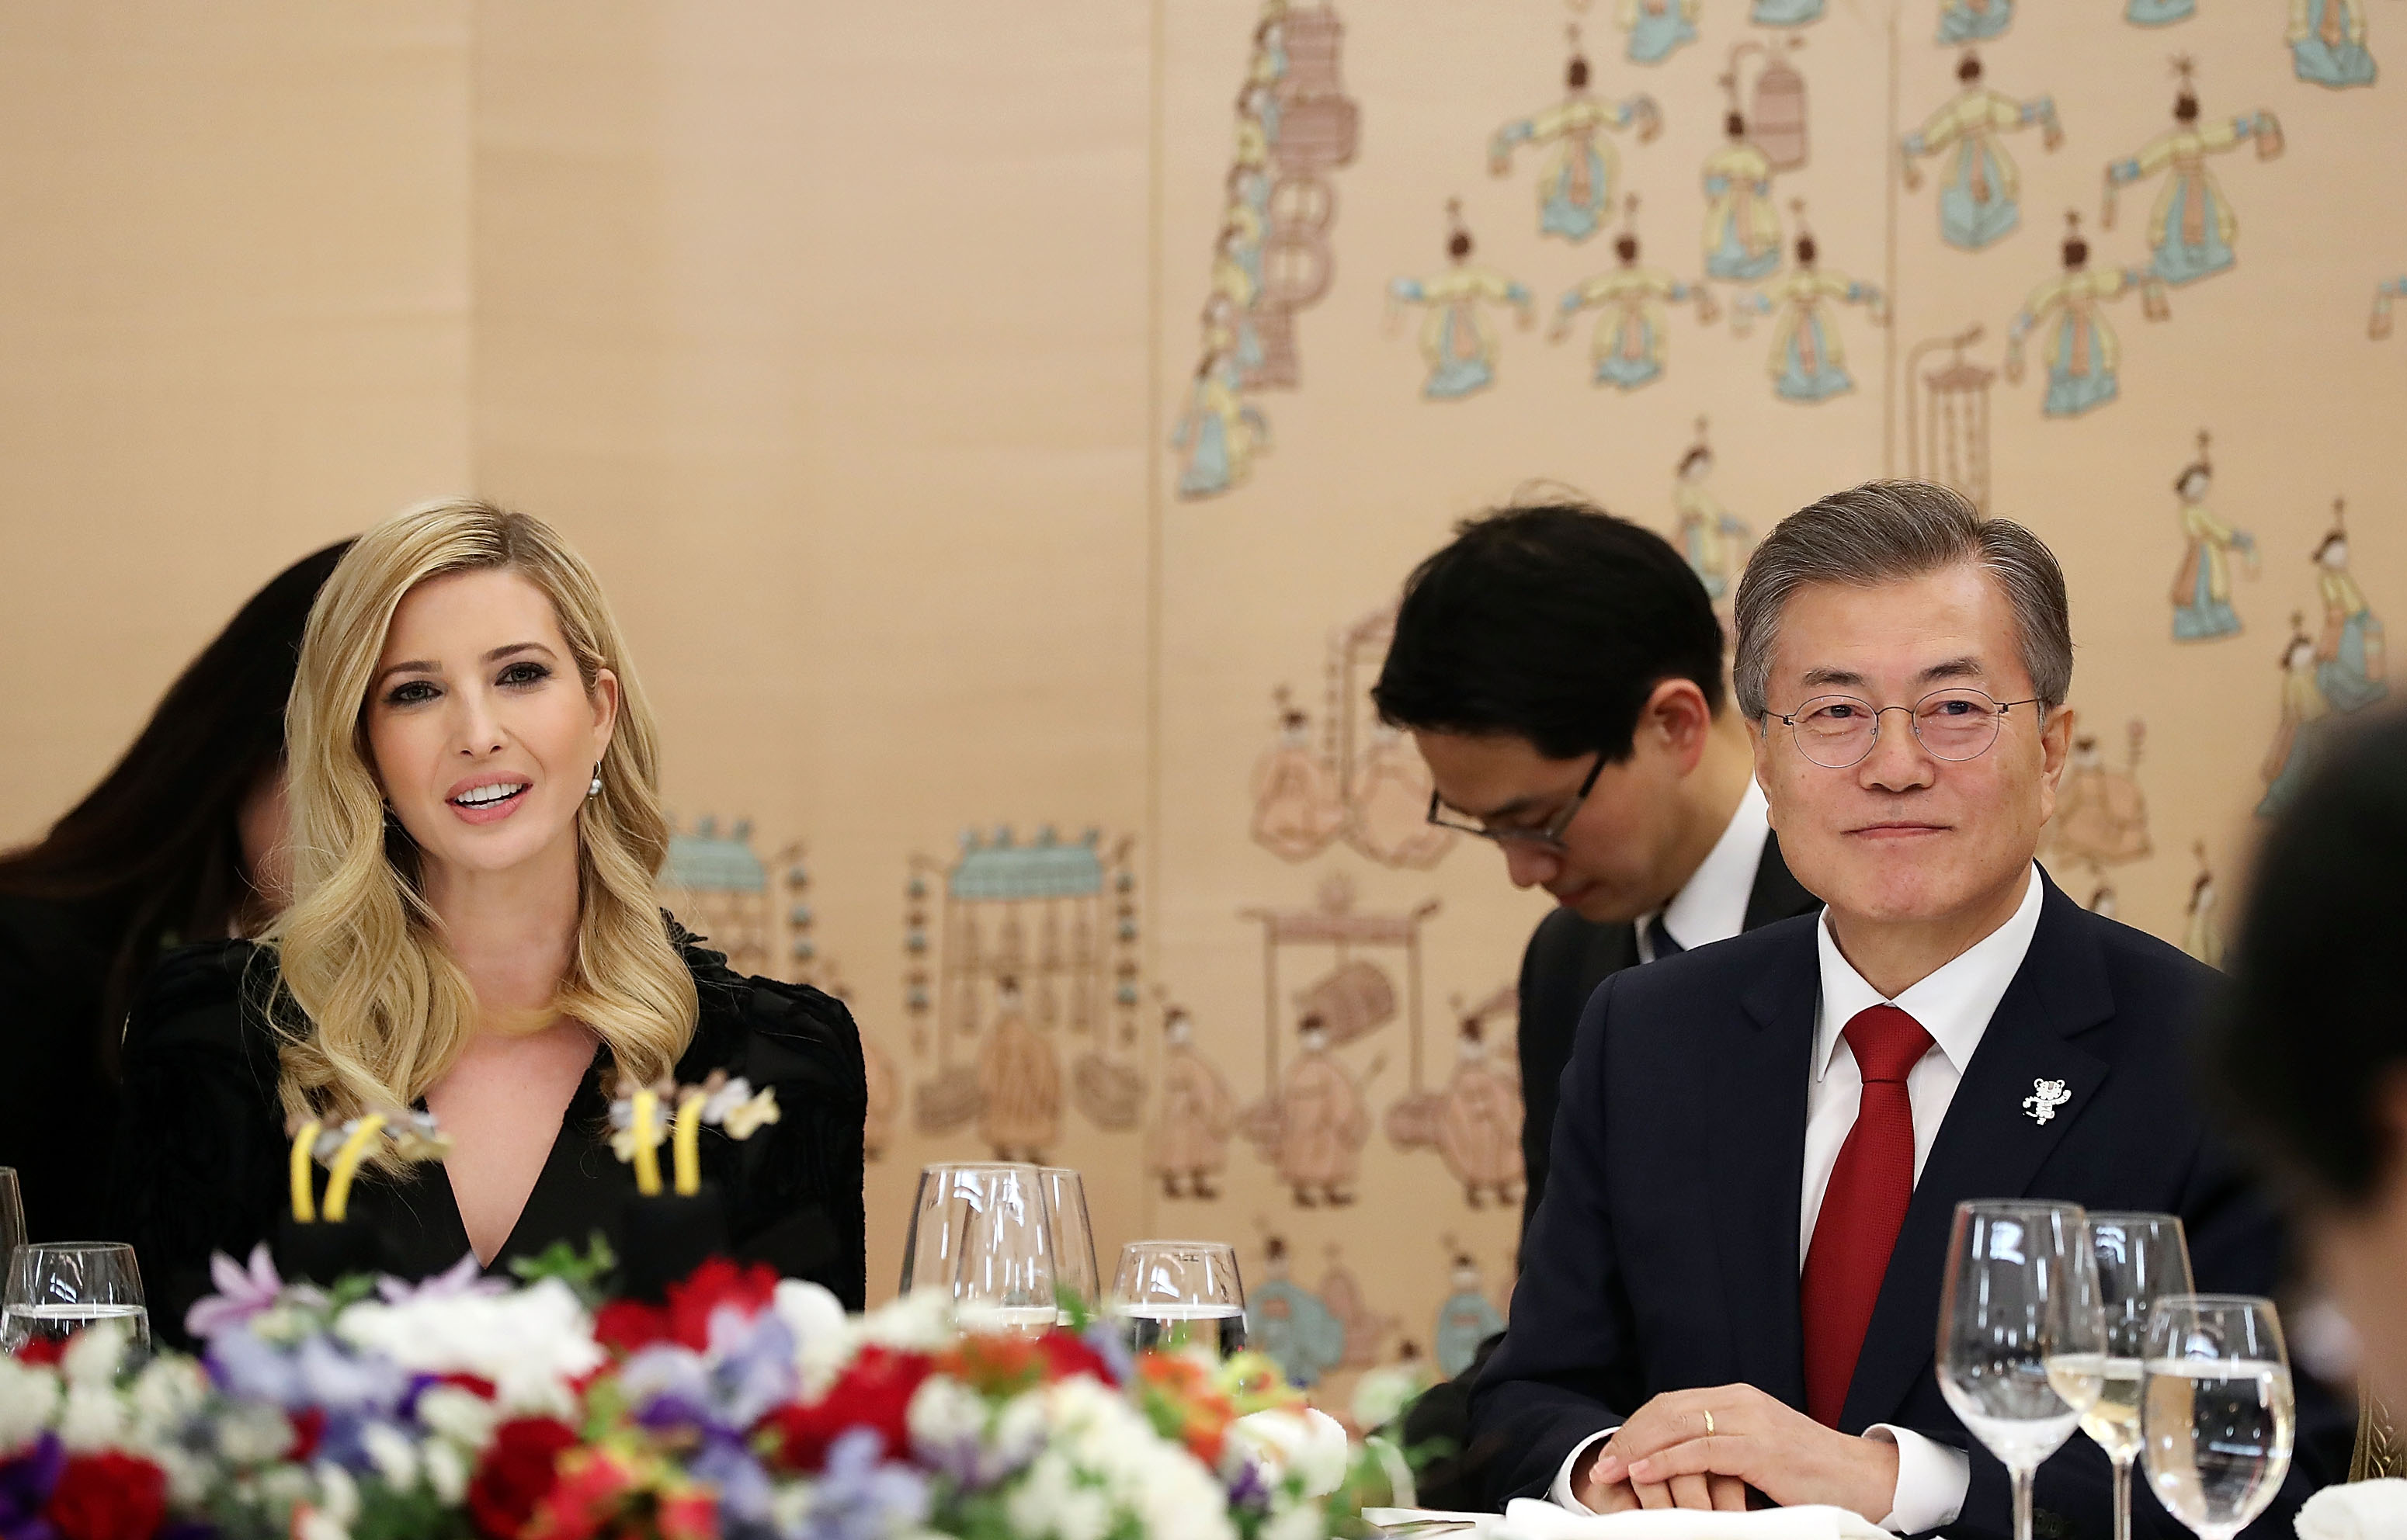 In this handout image provided by the South Korean Presidential Blue House, South Korean President Moon Jae-In (R) talks with Ivanka Trump (L) during their dinner at the Presidential Blue House on February 23, 2018 in Seoul, South Korea (Handout - Getty Images)